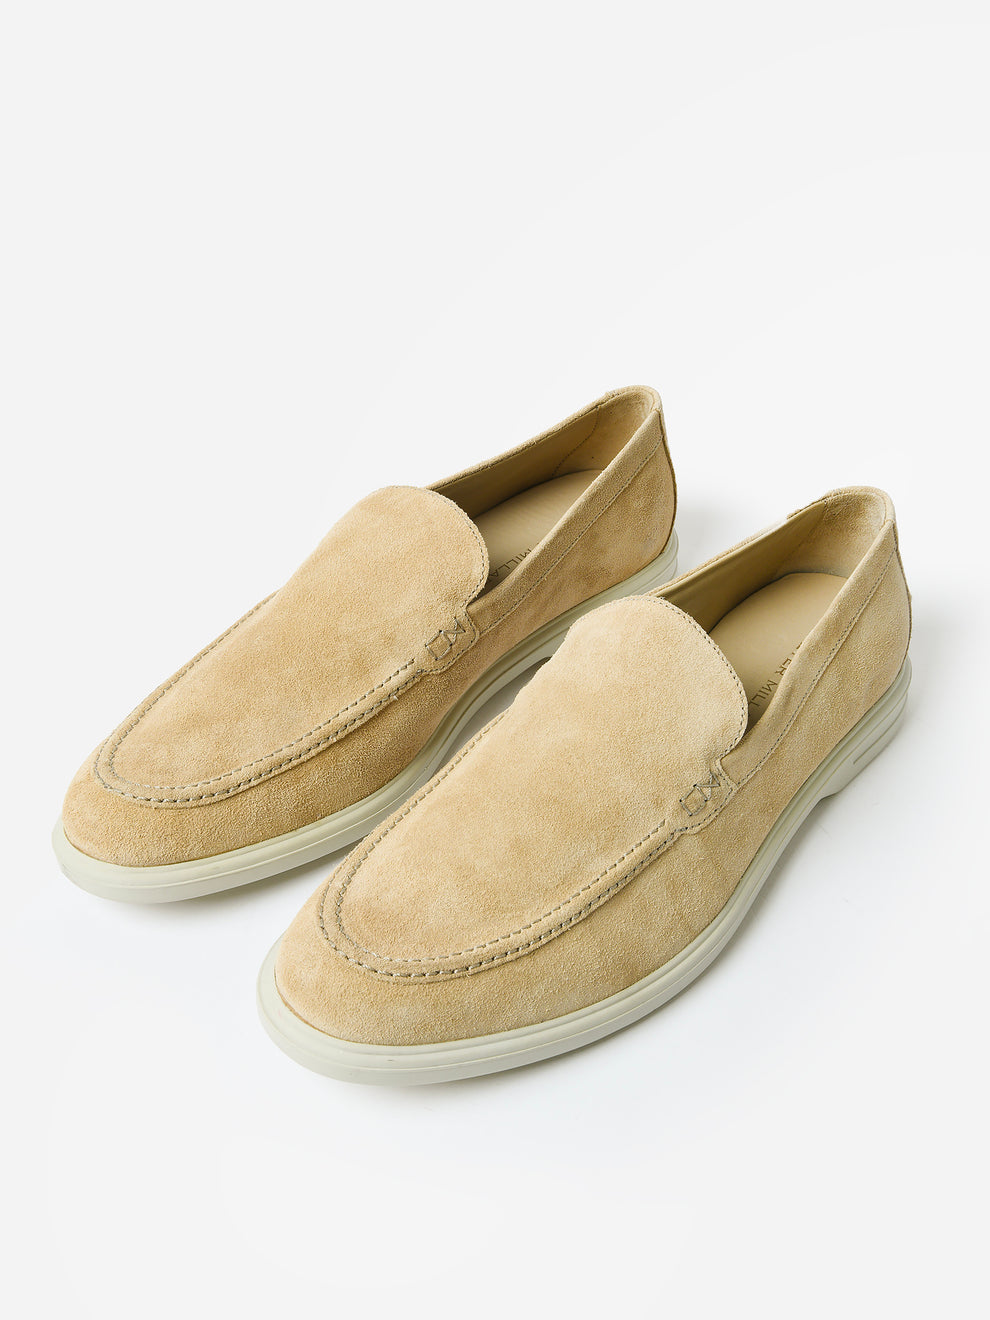 Peter Millar Crown Crafted Men's Excursionist Venetian Loafer ...